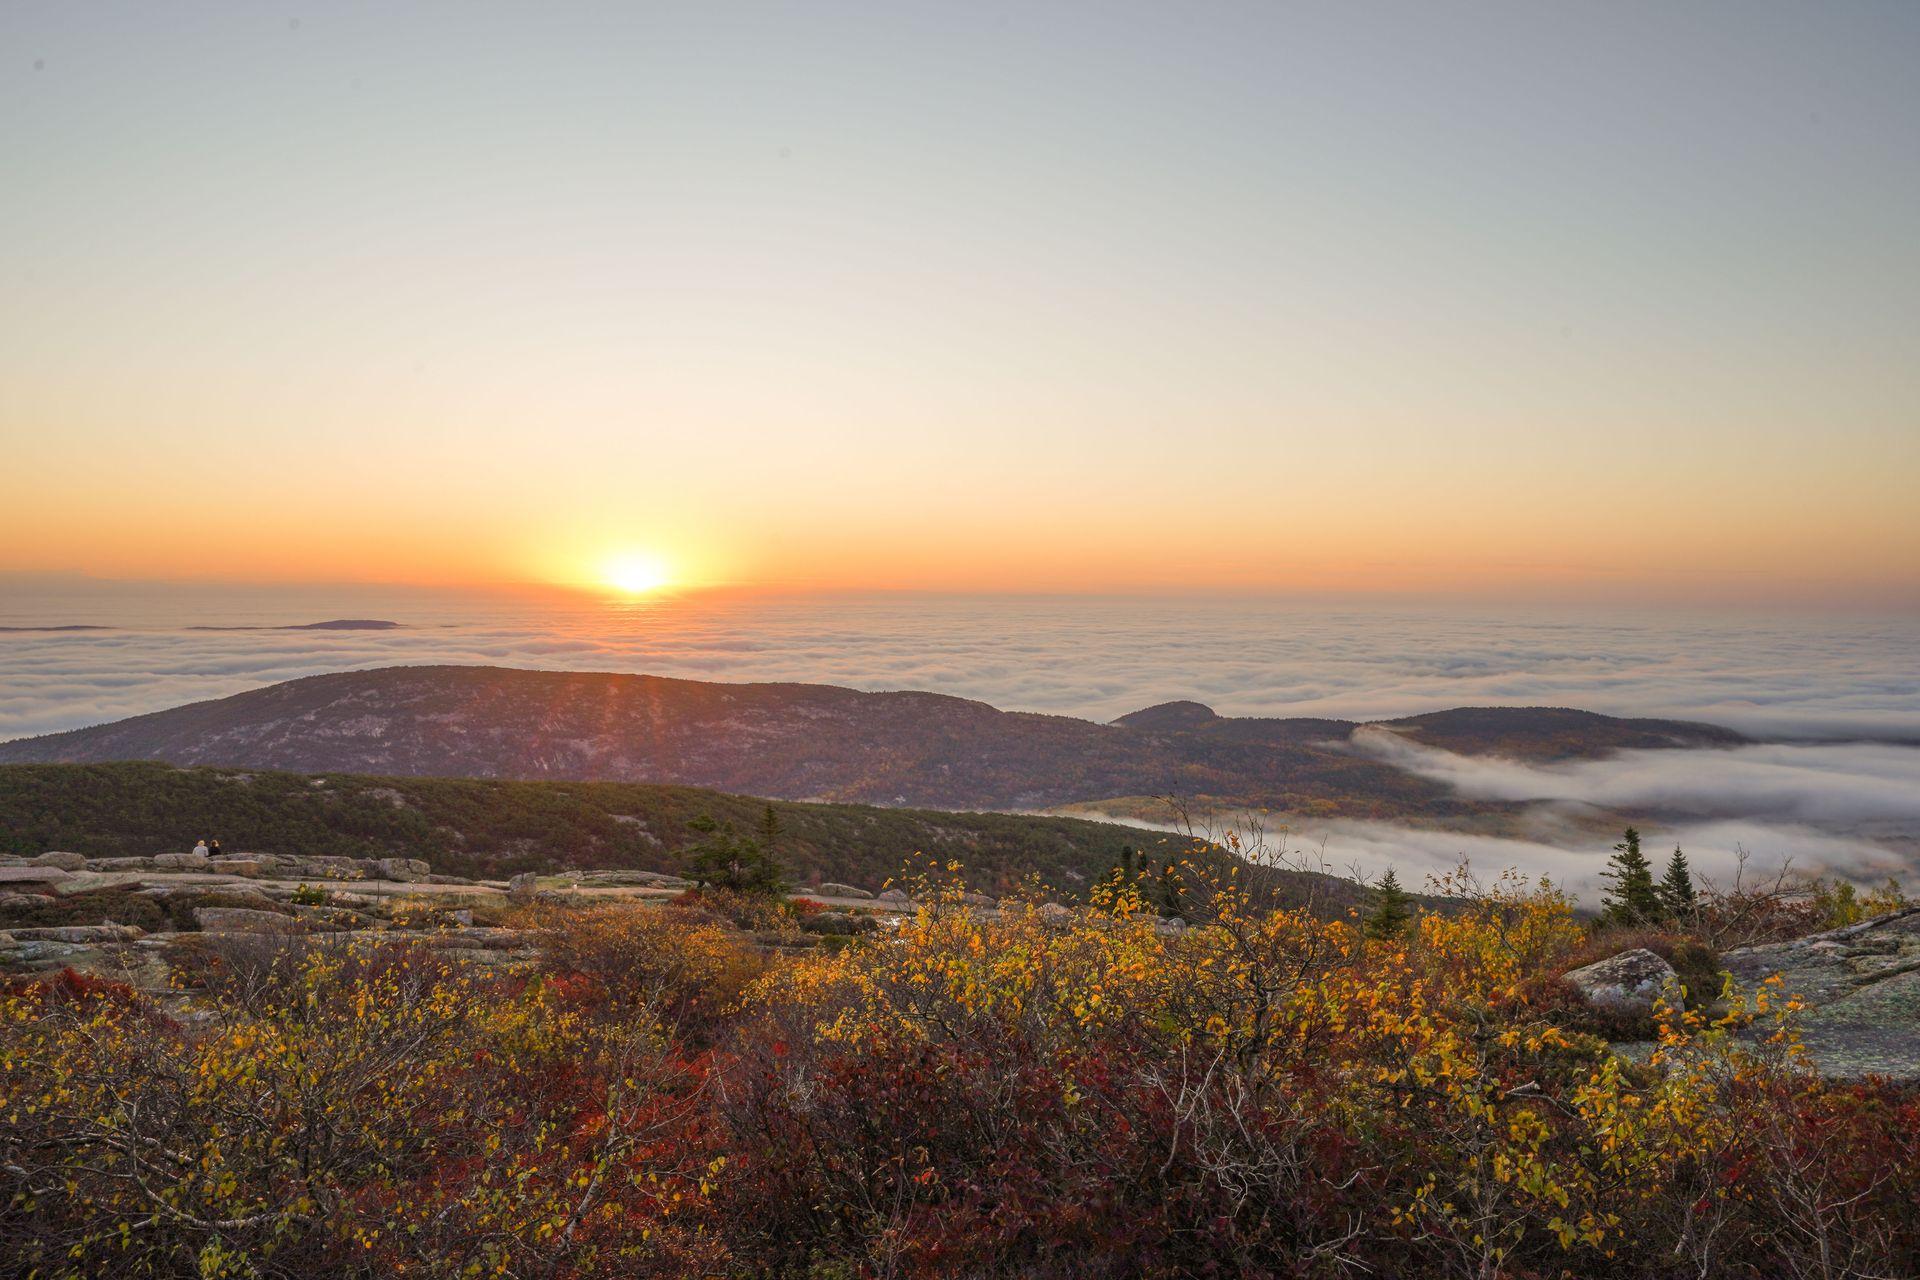 The sun rising over a cloud inversion from Cadillac Mountain